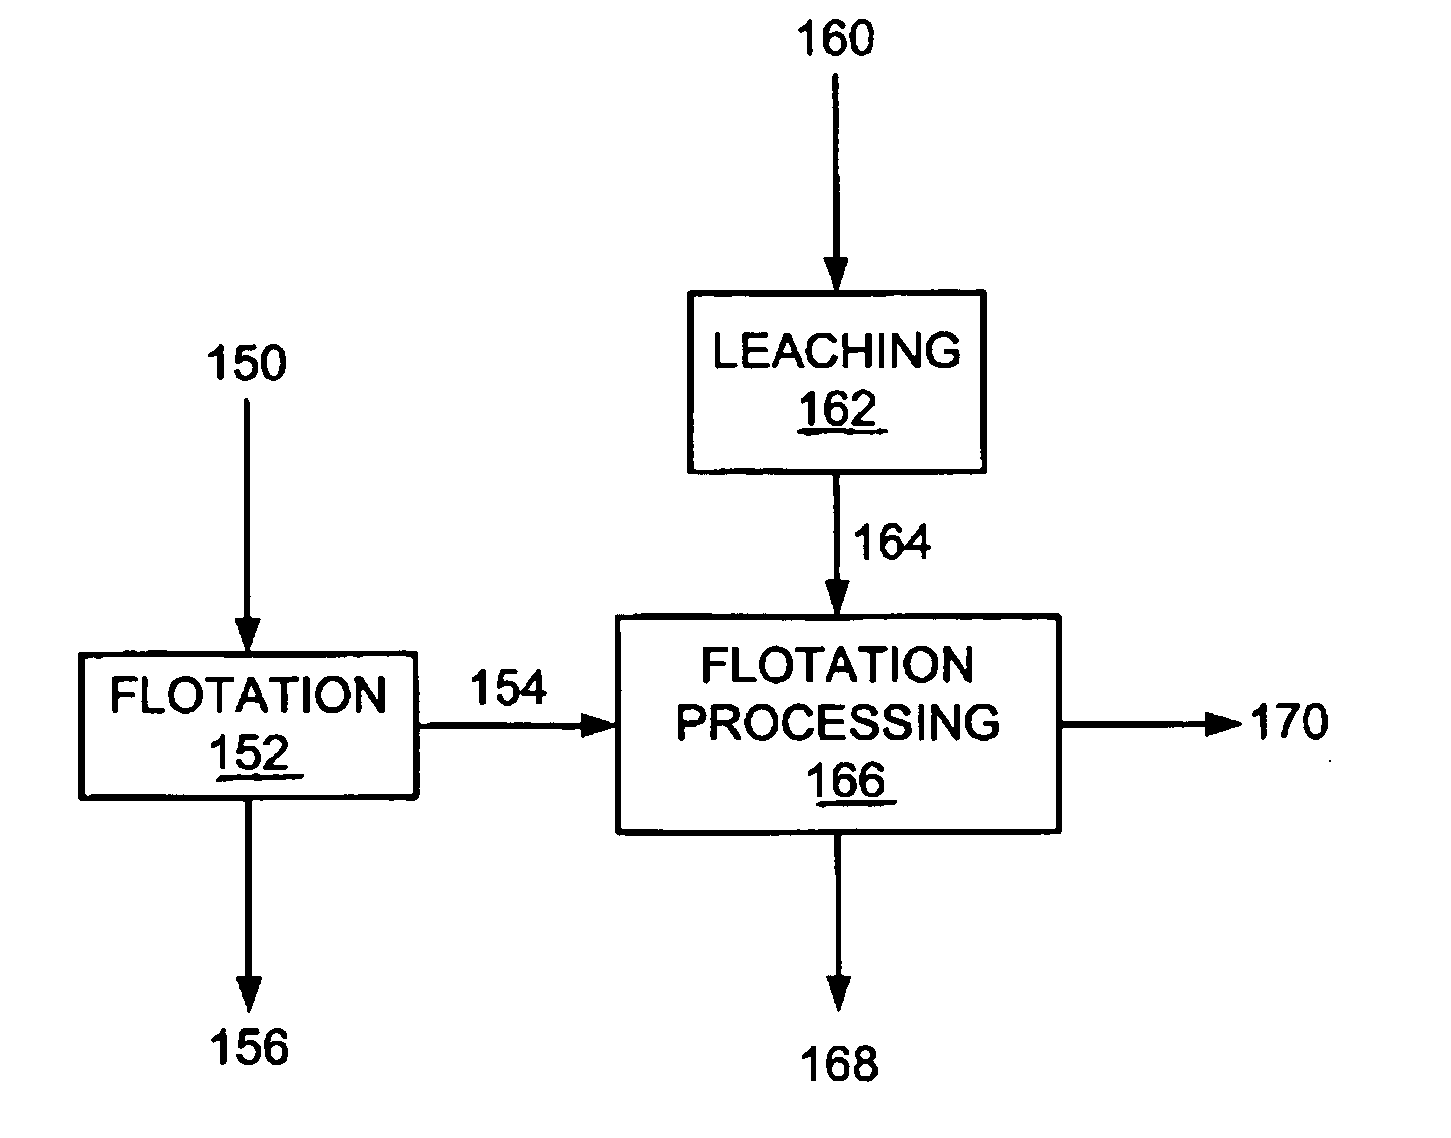 Flotation processing including recovery of soluble nonferrous base metal values